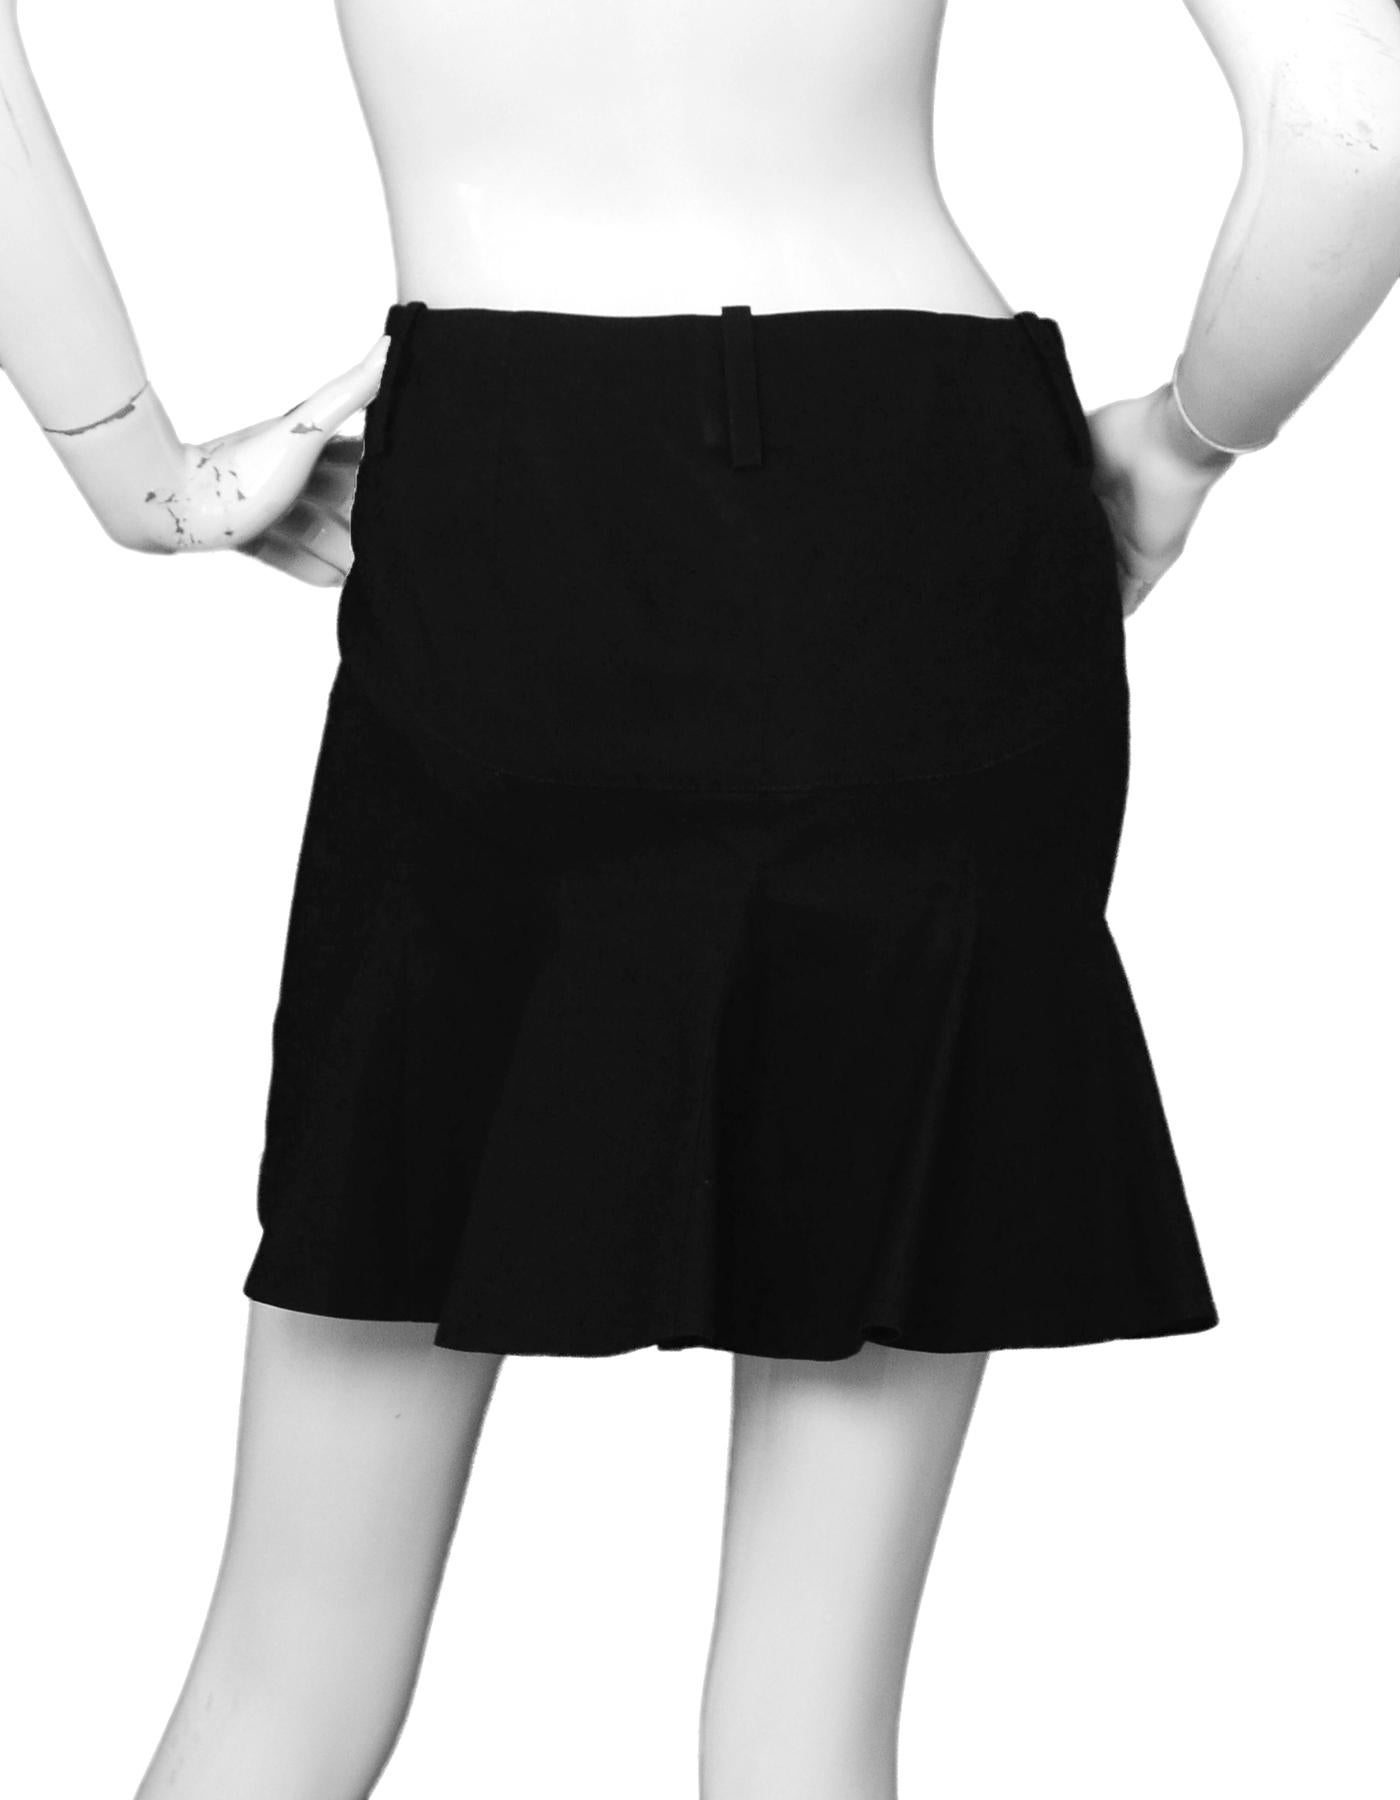 Alexander McQueen Black Cotton Skirt w/ Ruffle sz 38 In Excellent Condition For Sale In New York, NY